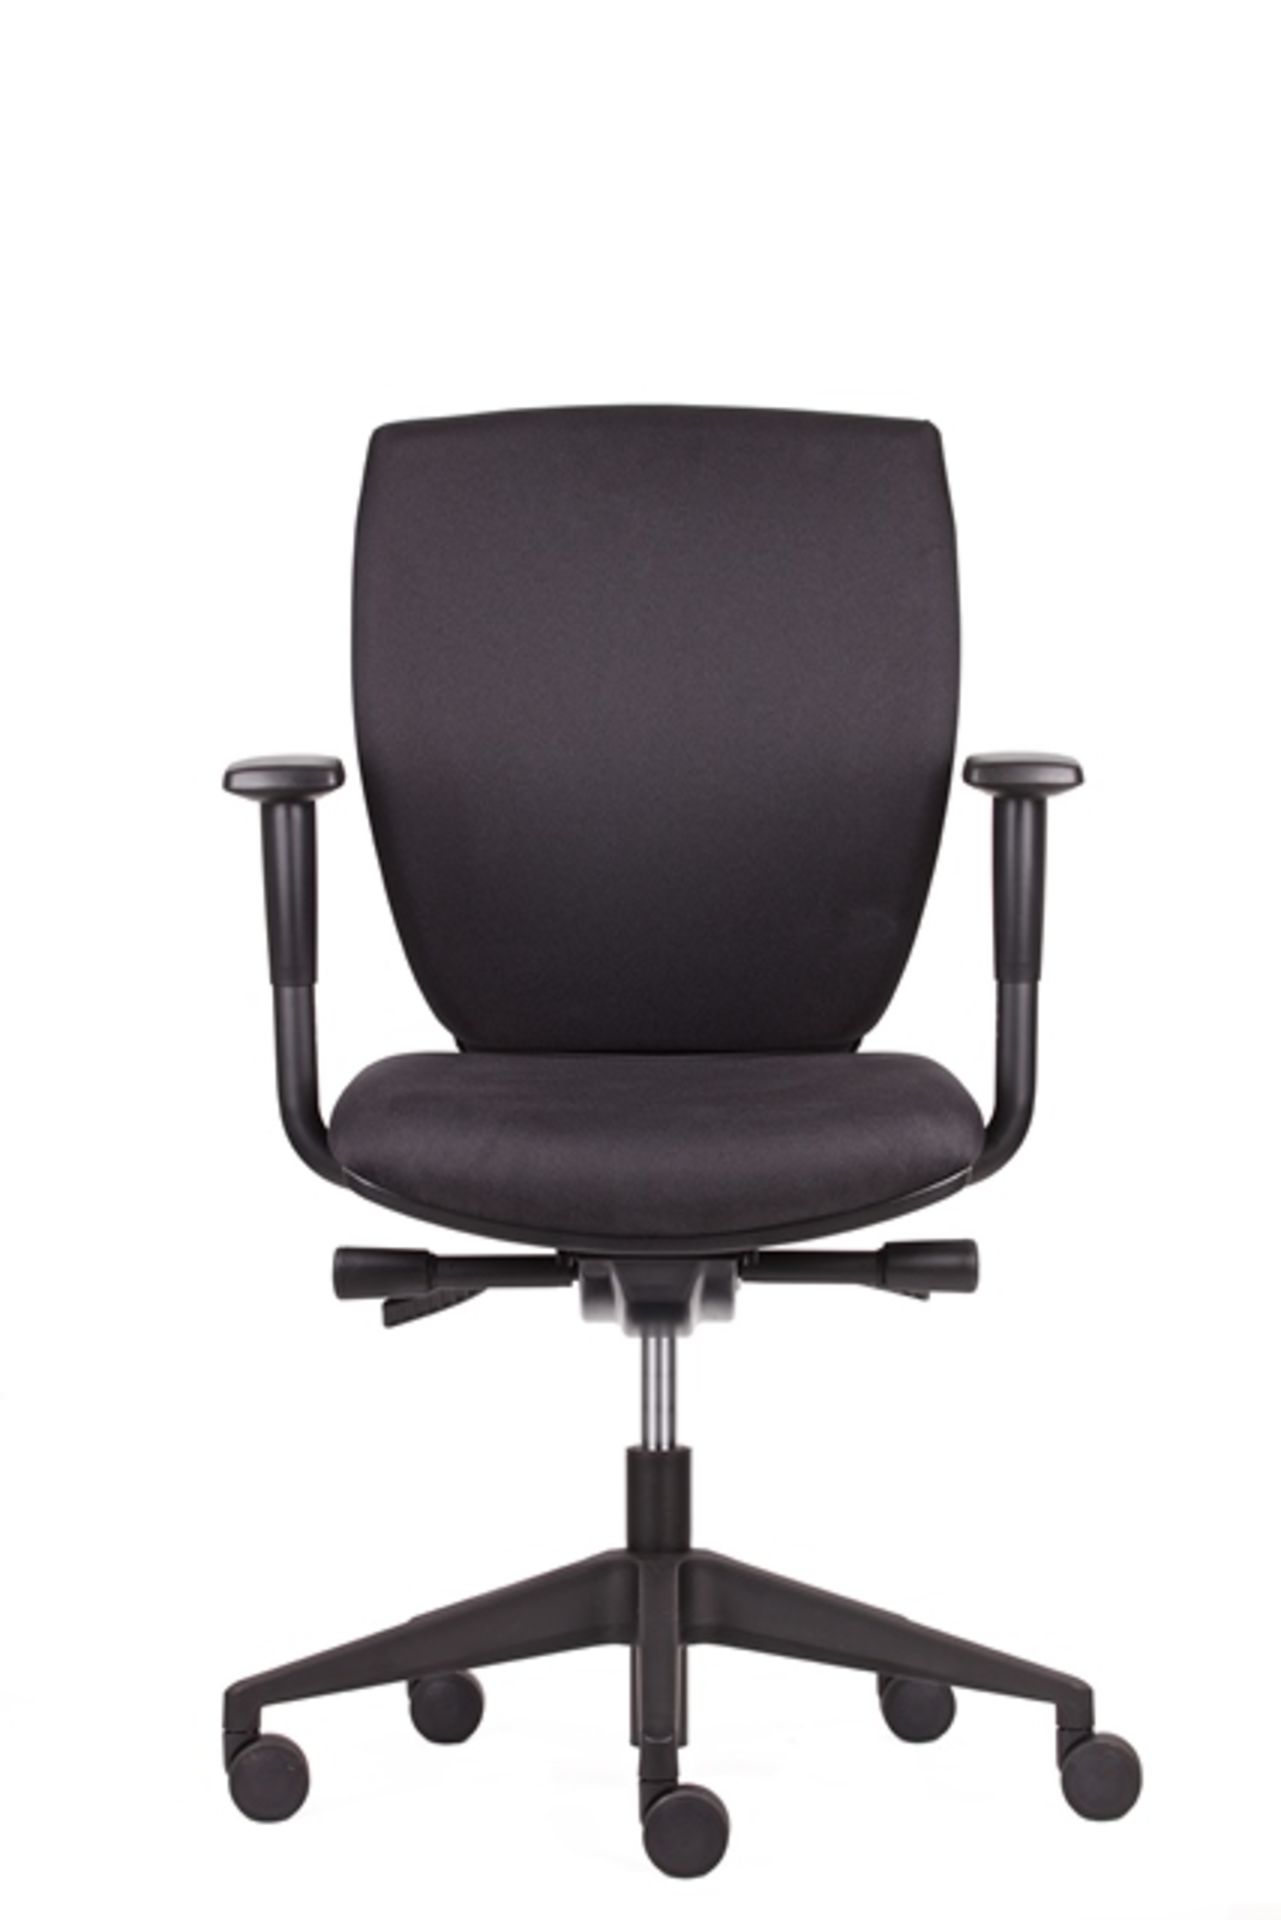 Unused operators chair in black (RRP £199) located in Stafford, viewing by appointment only 24/09/